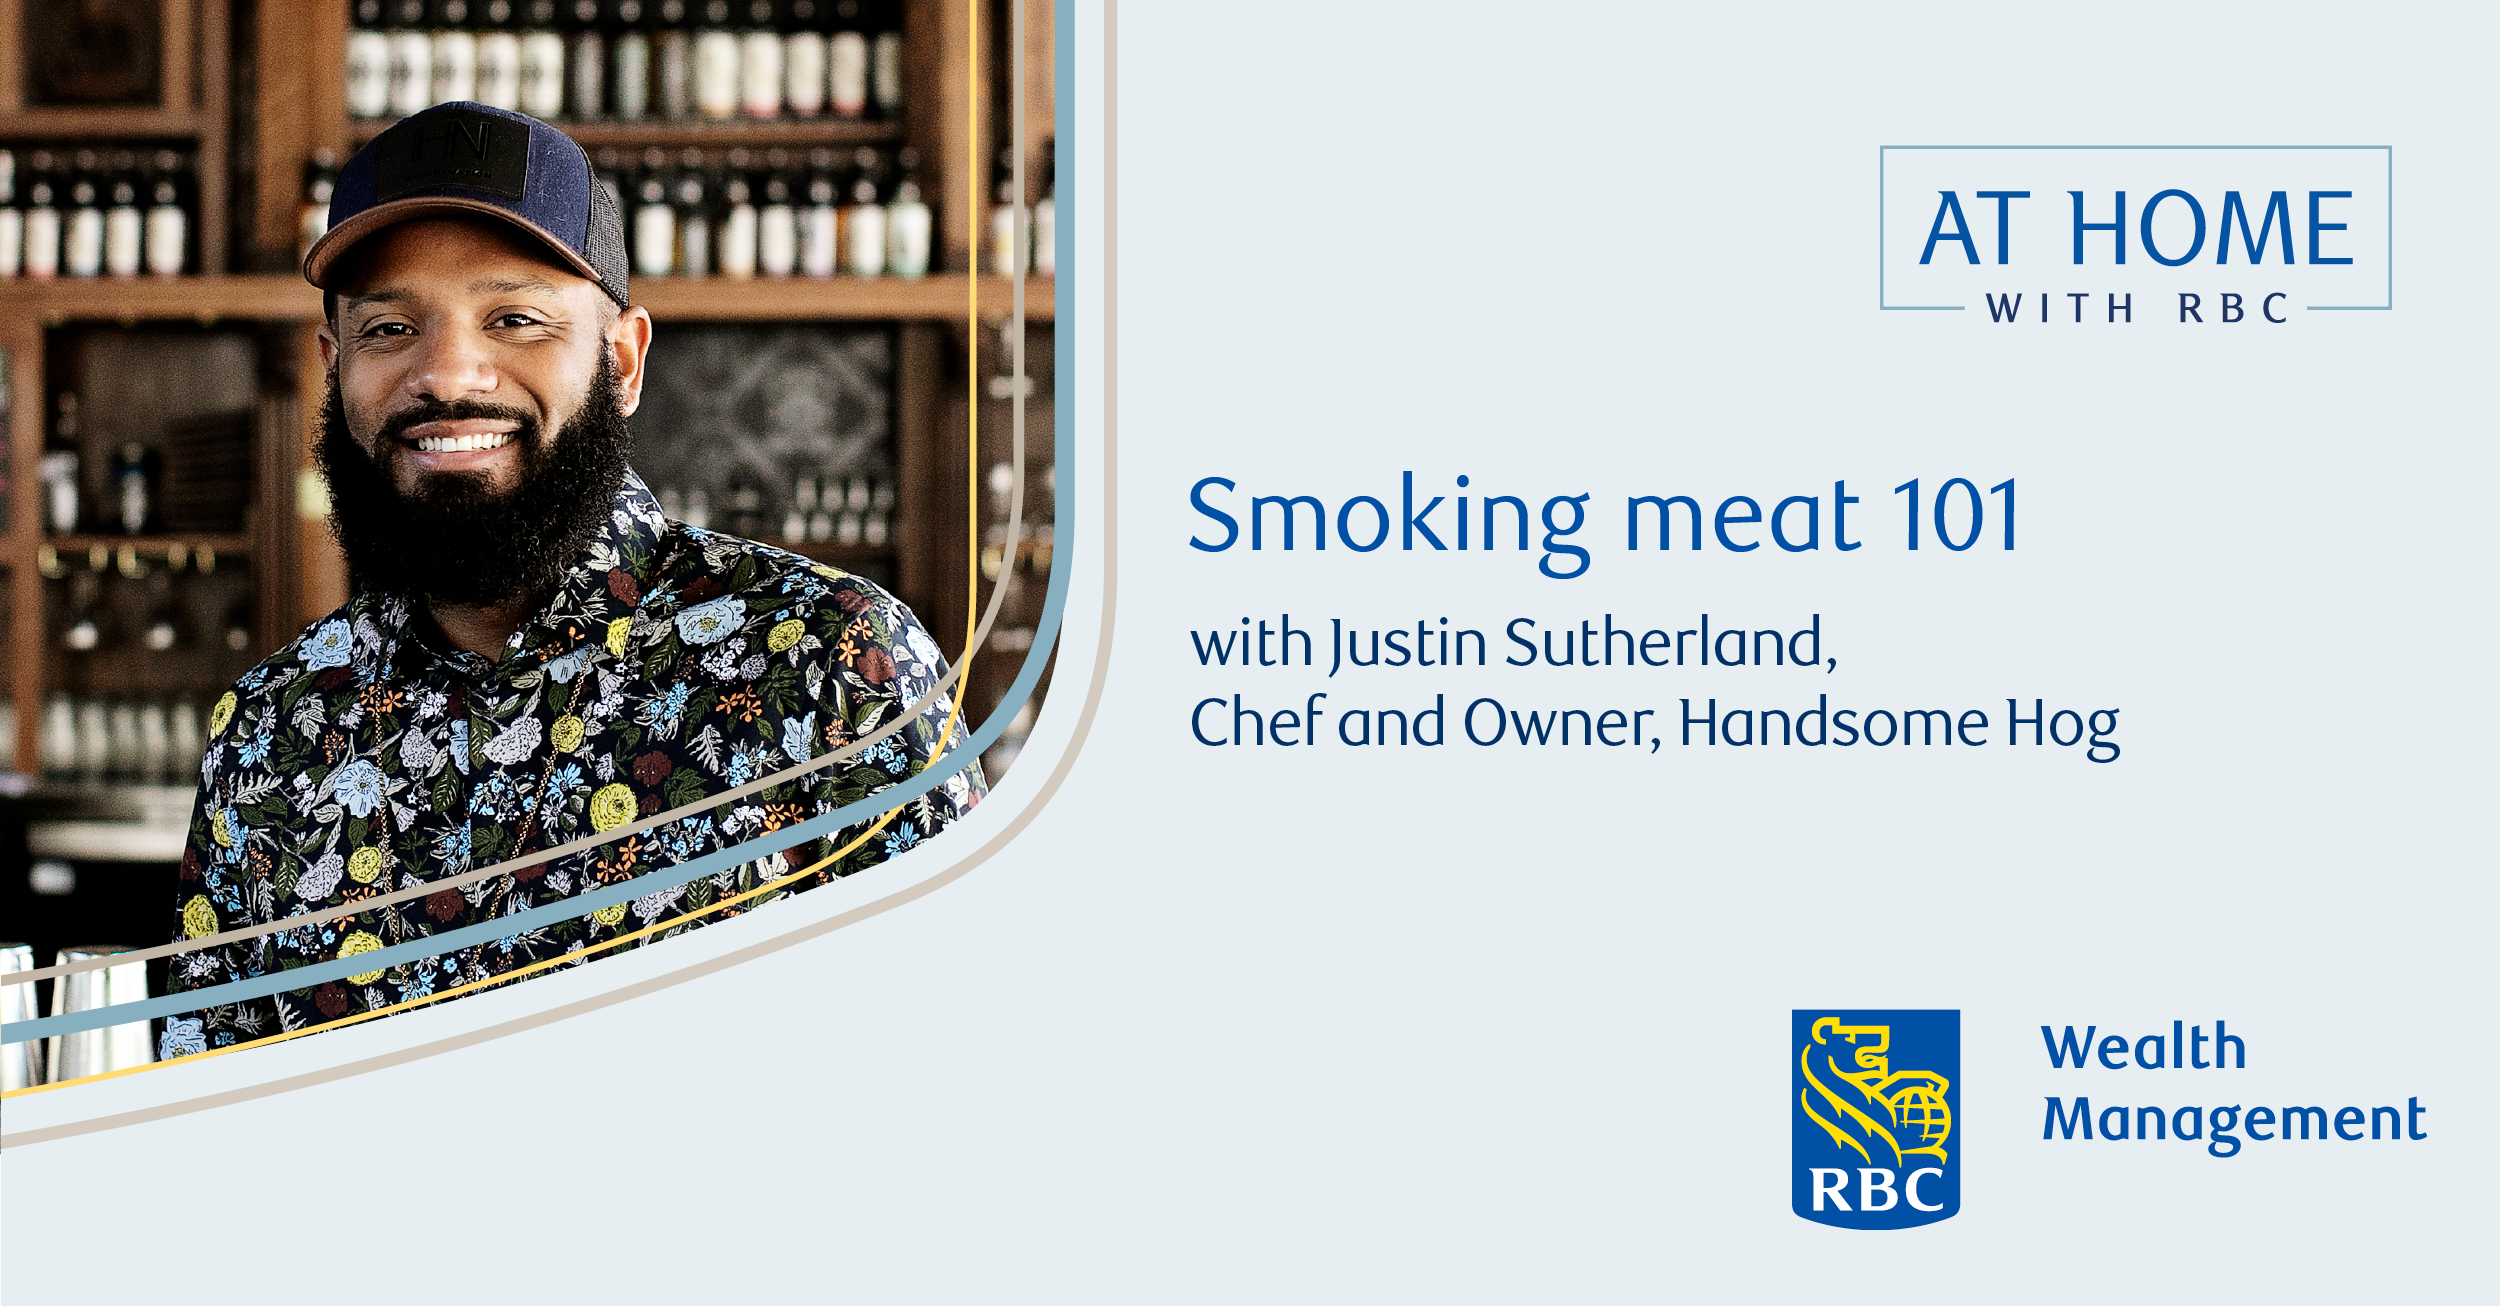 At home with RBC: Smoking meat 101